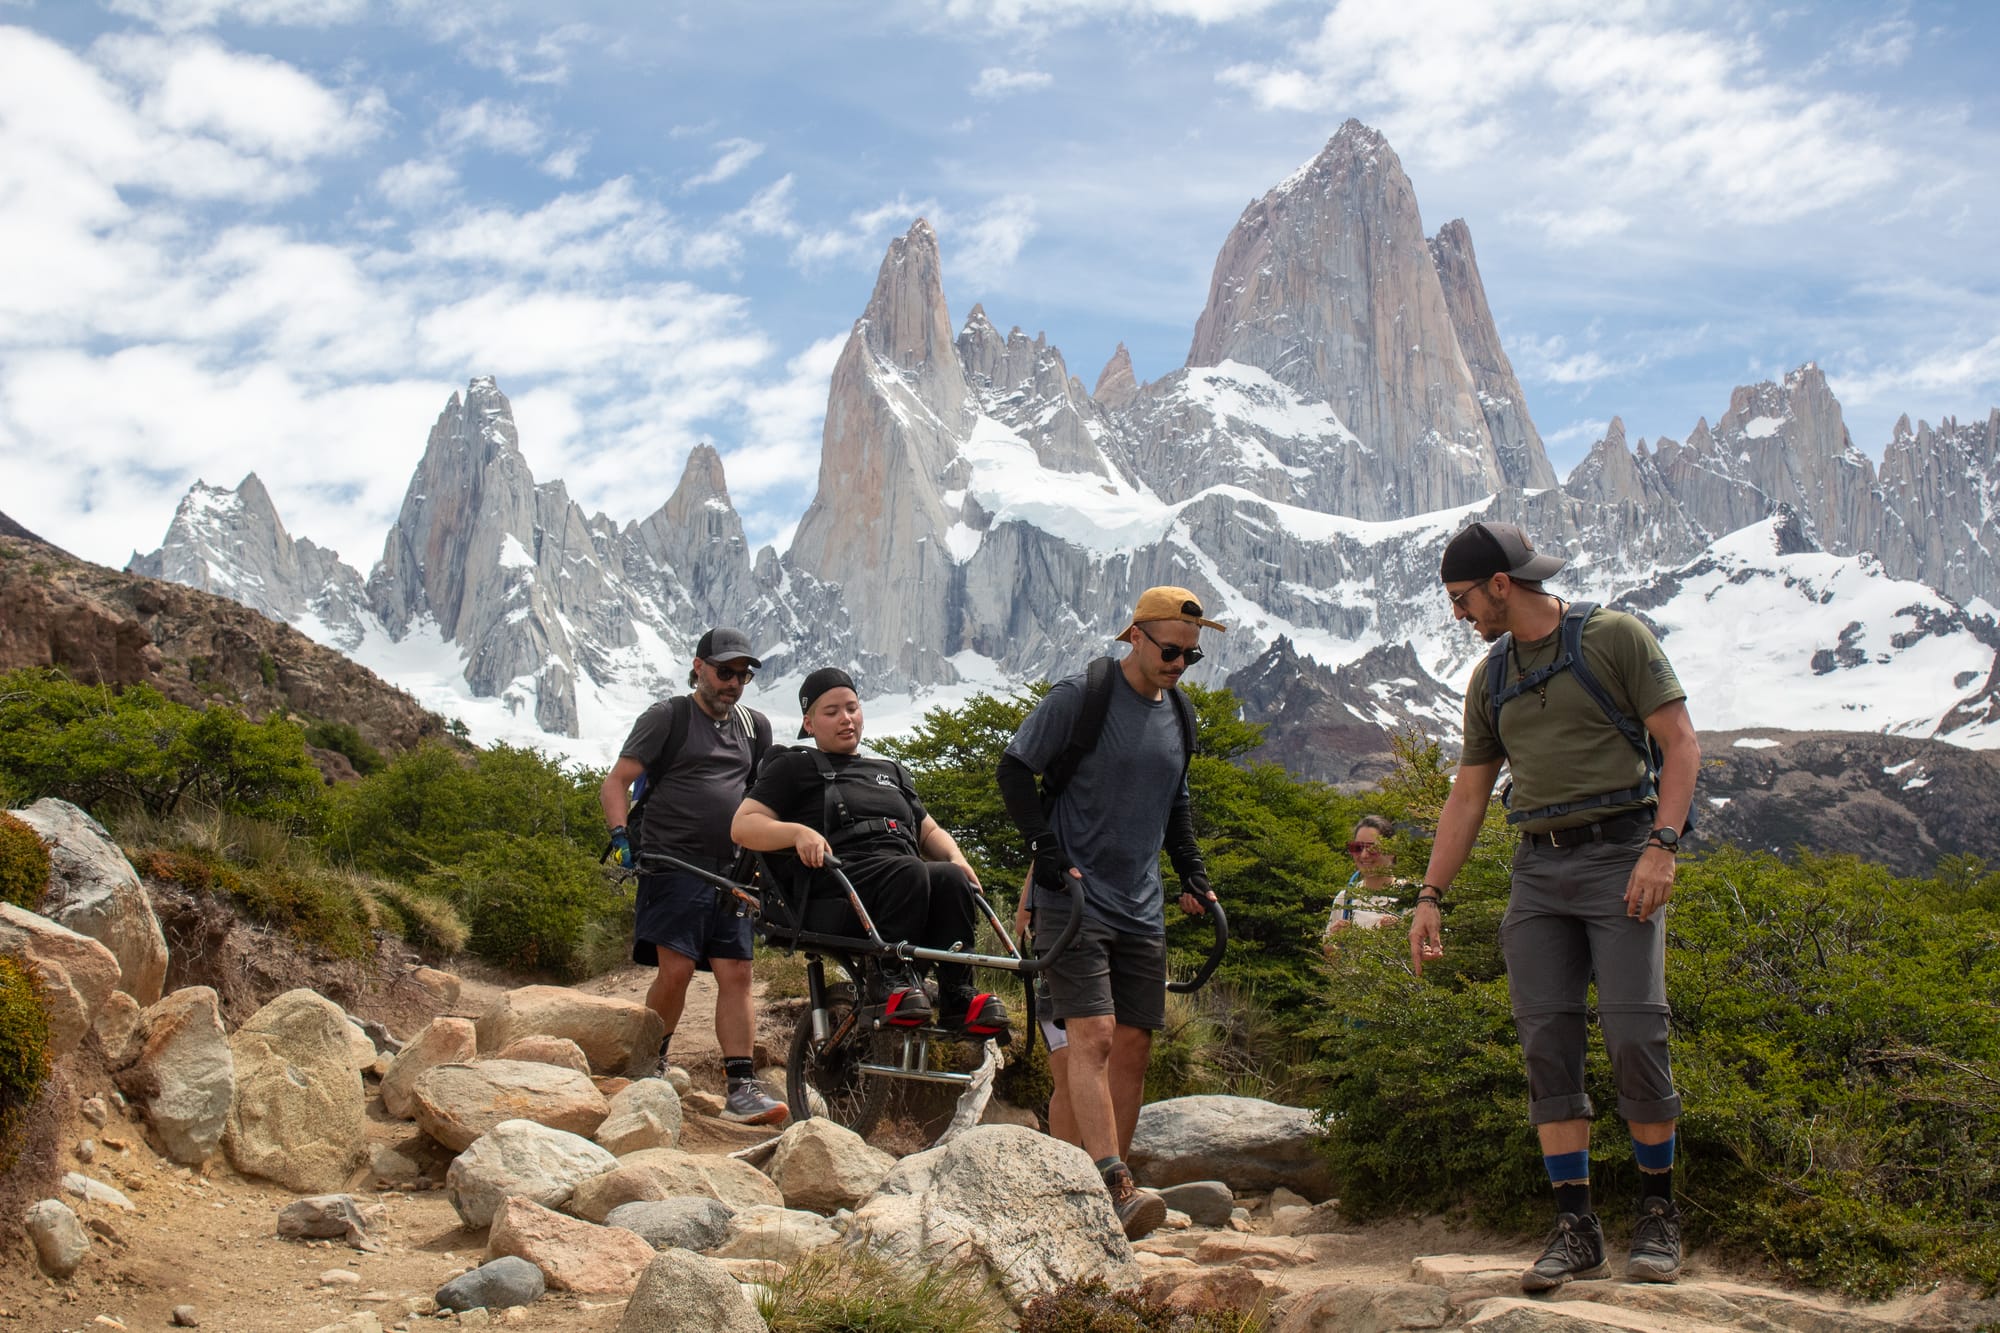 A wheelchair users hiking through Patagonia in a joelette wheelchair with assistance